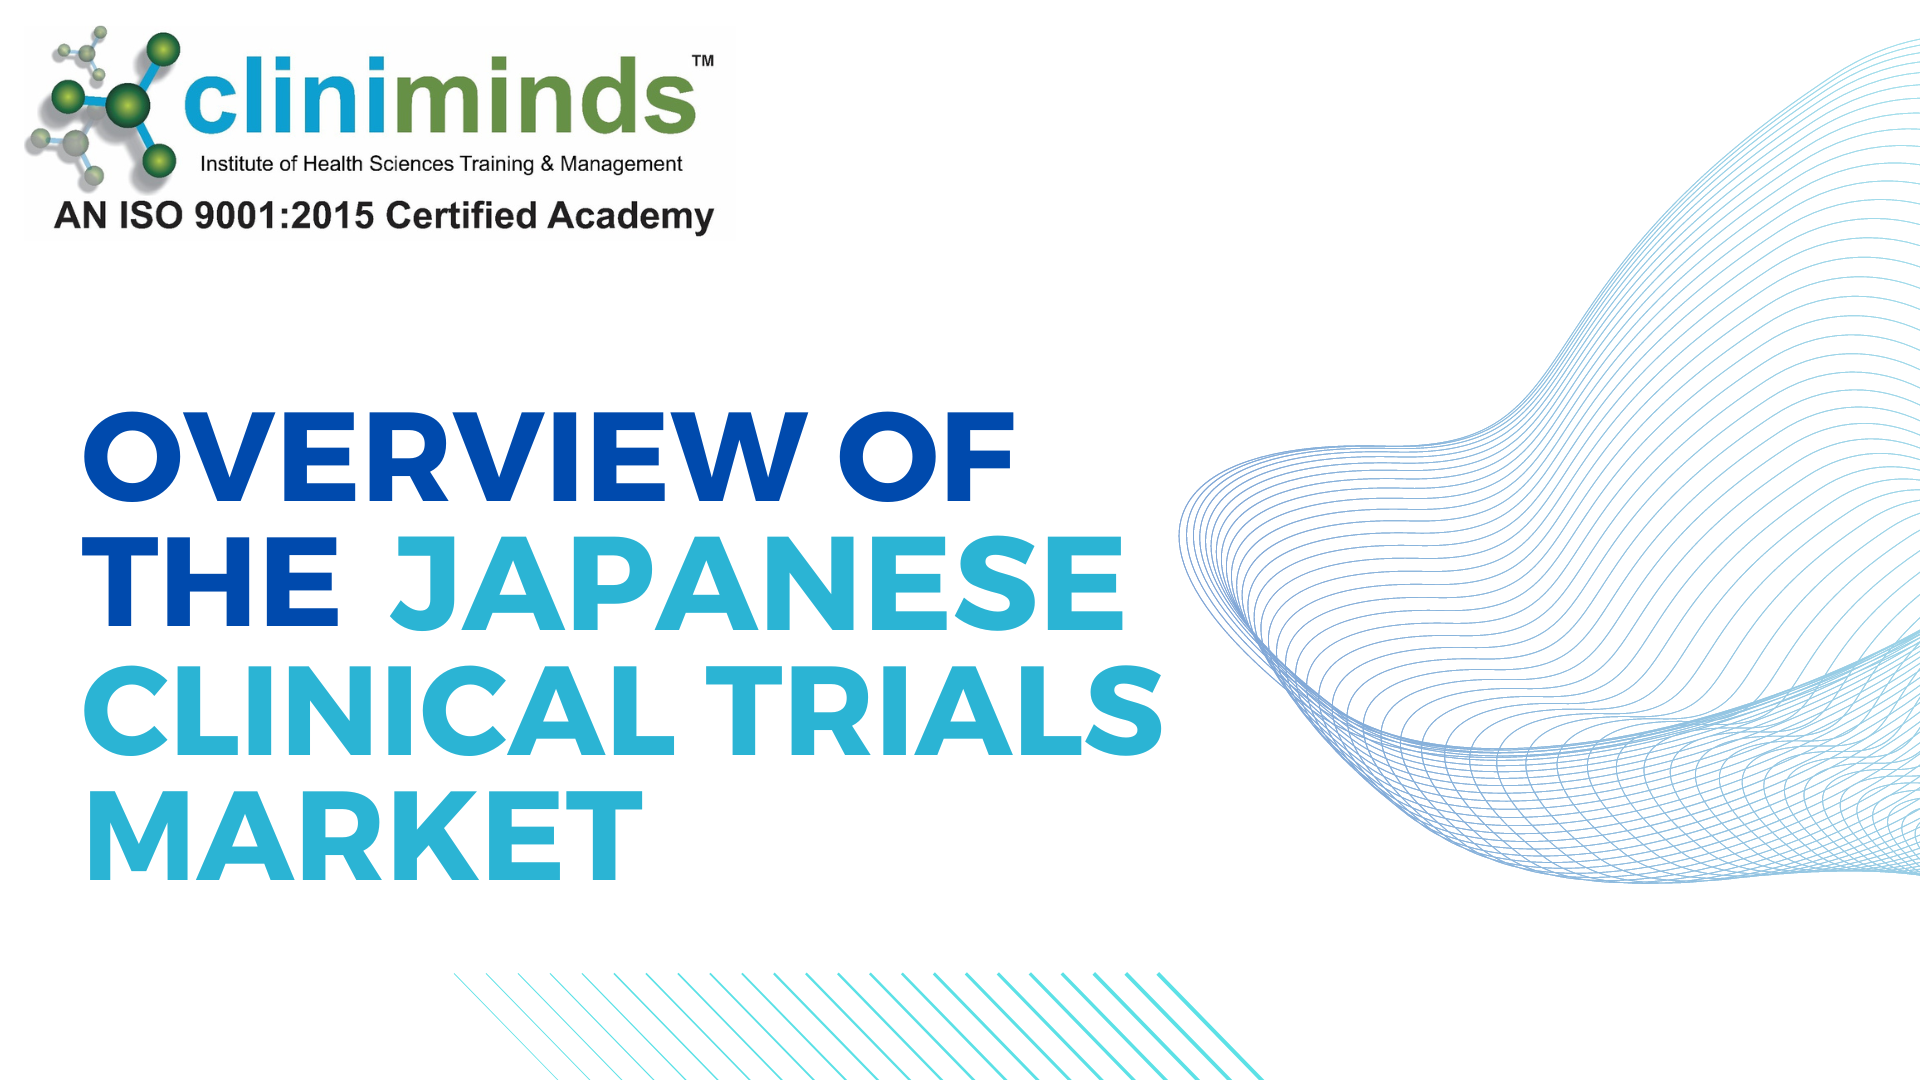 Overview of the Japanese Clinical Trials Market